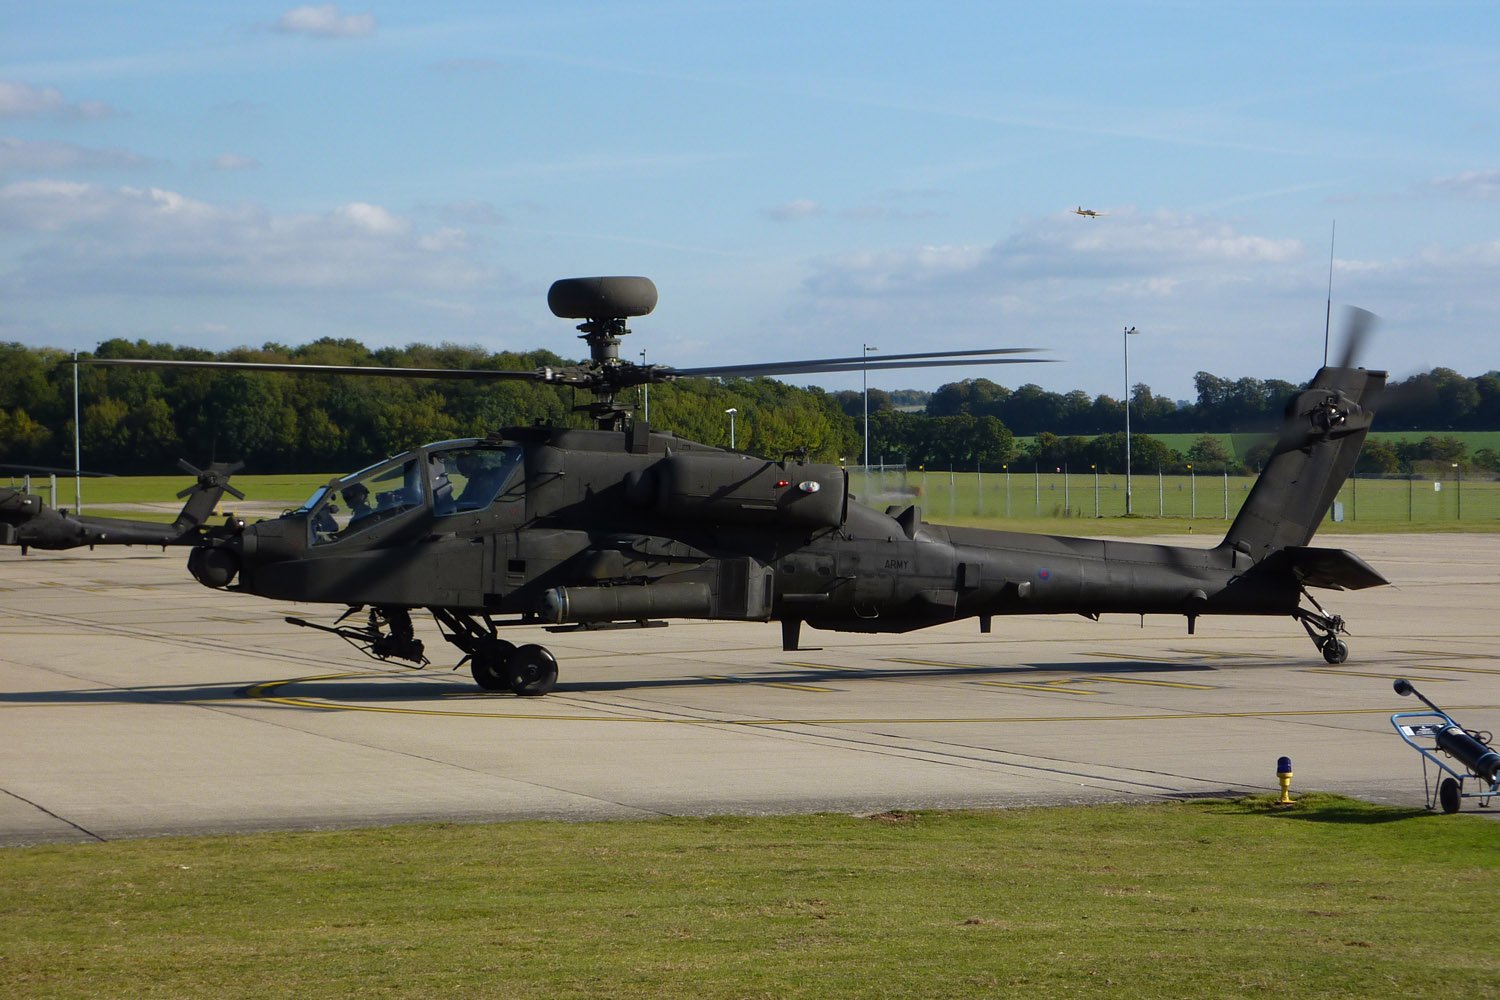 ZJ194 at Middle Wallop in October 2009